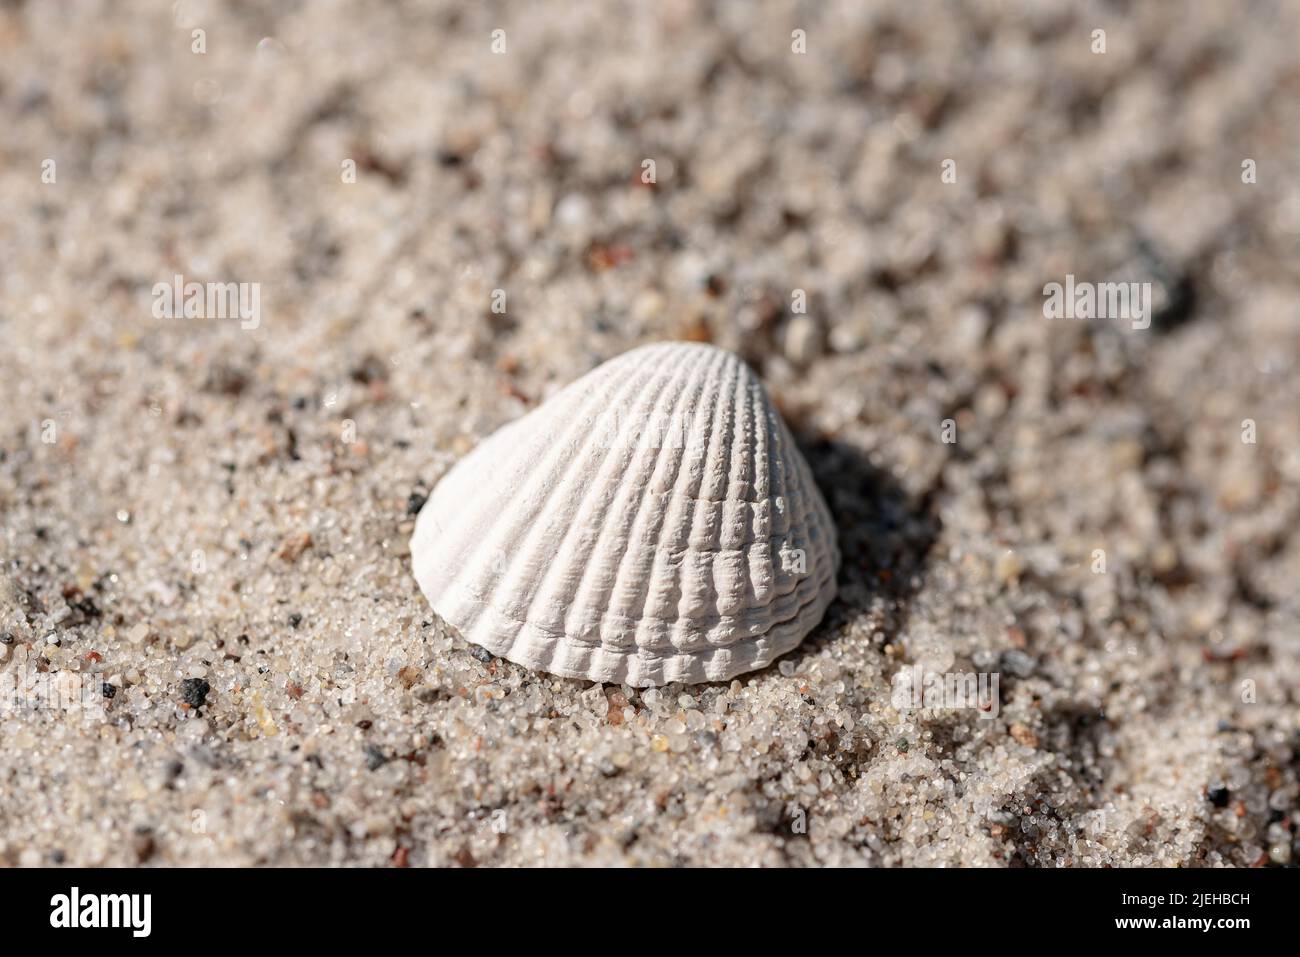 close-up view of seashell on sand beach Stock Photo